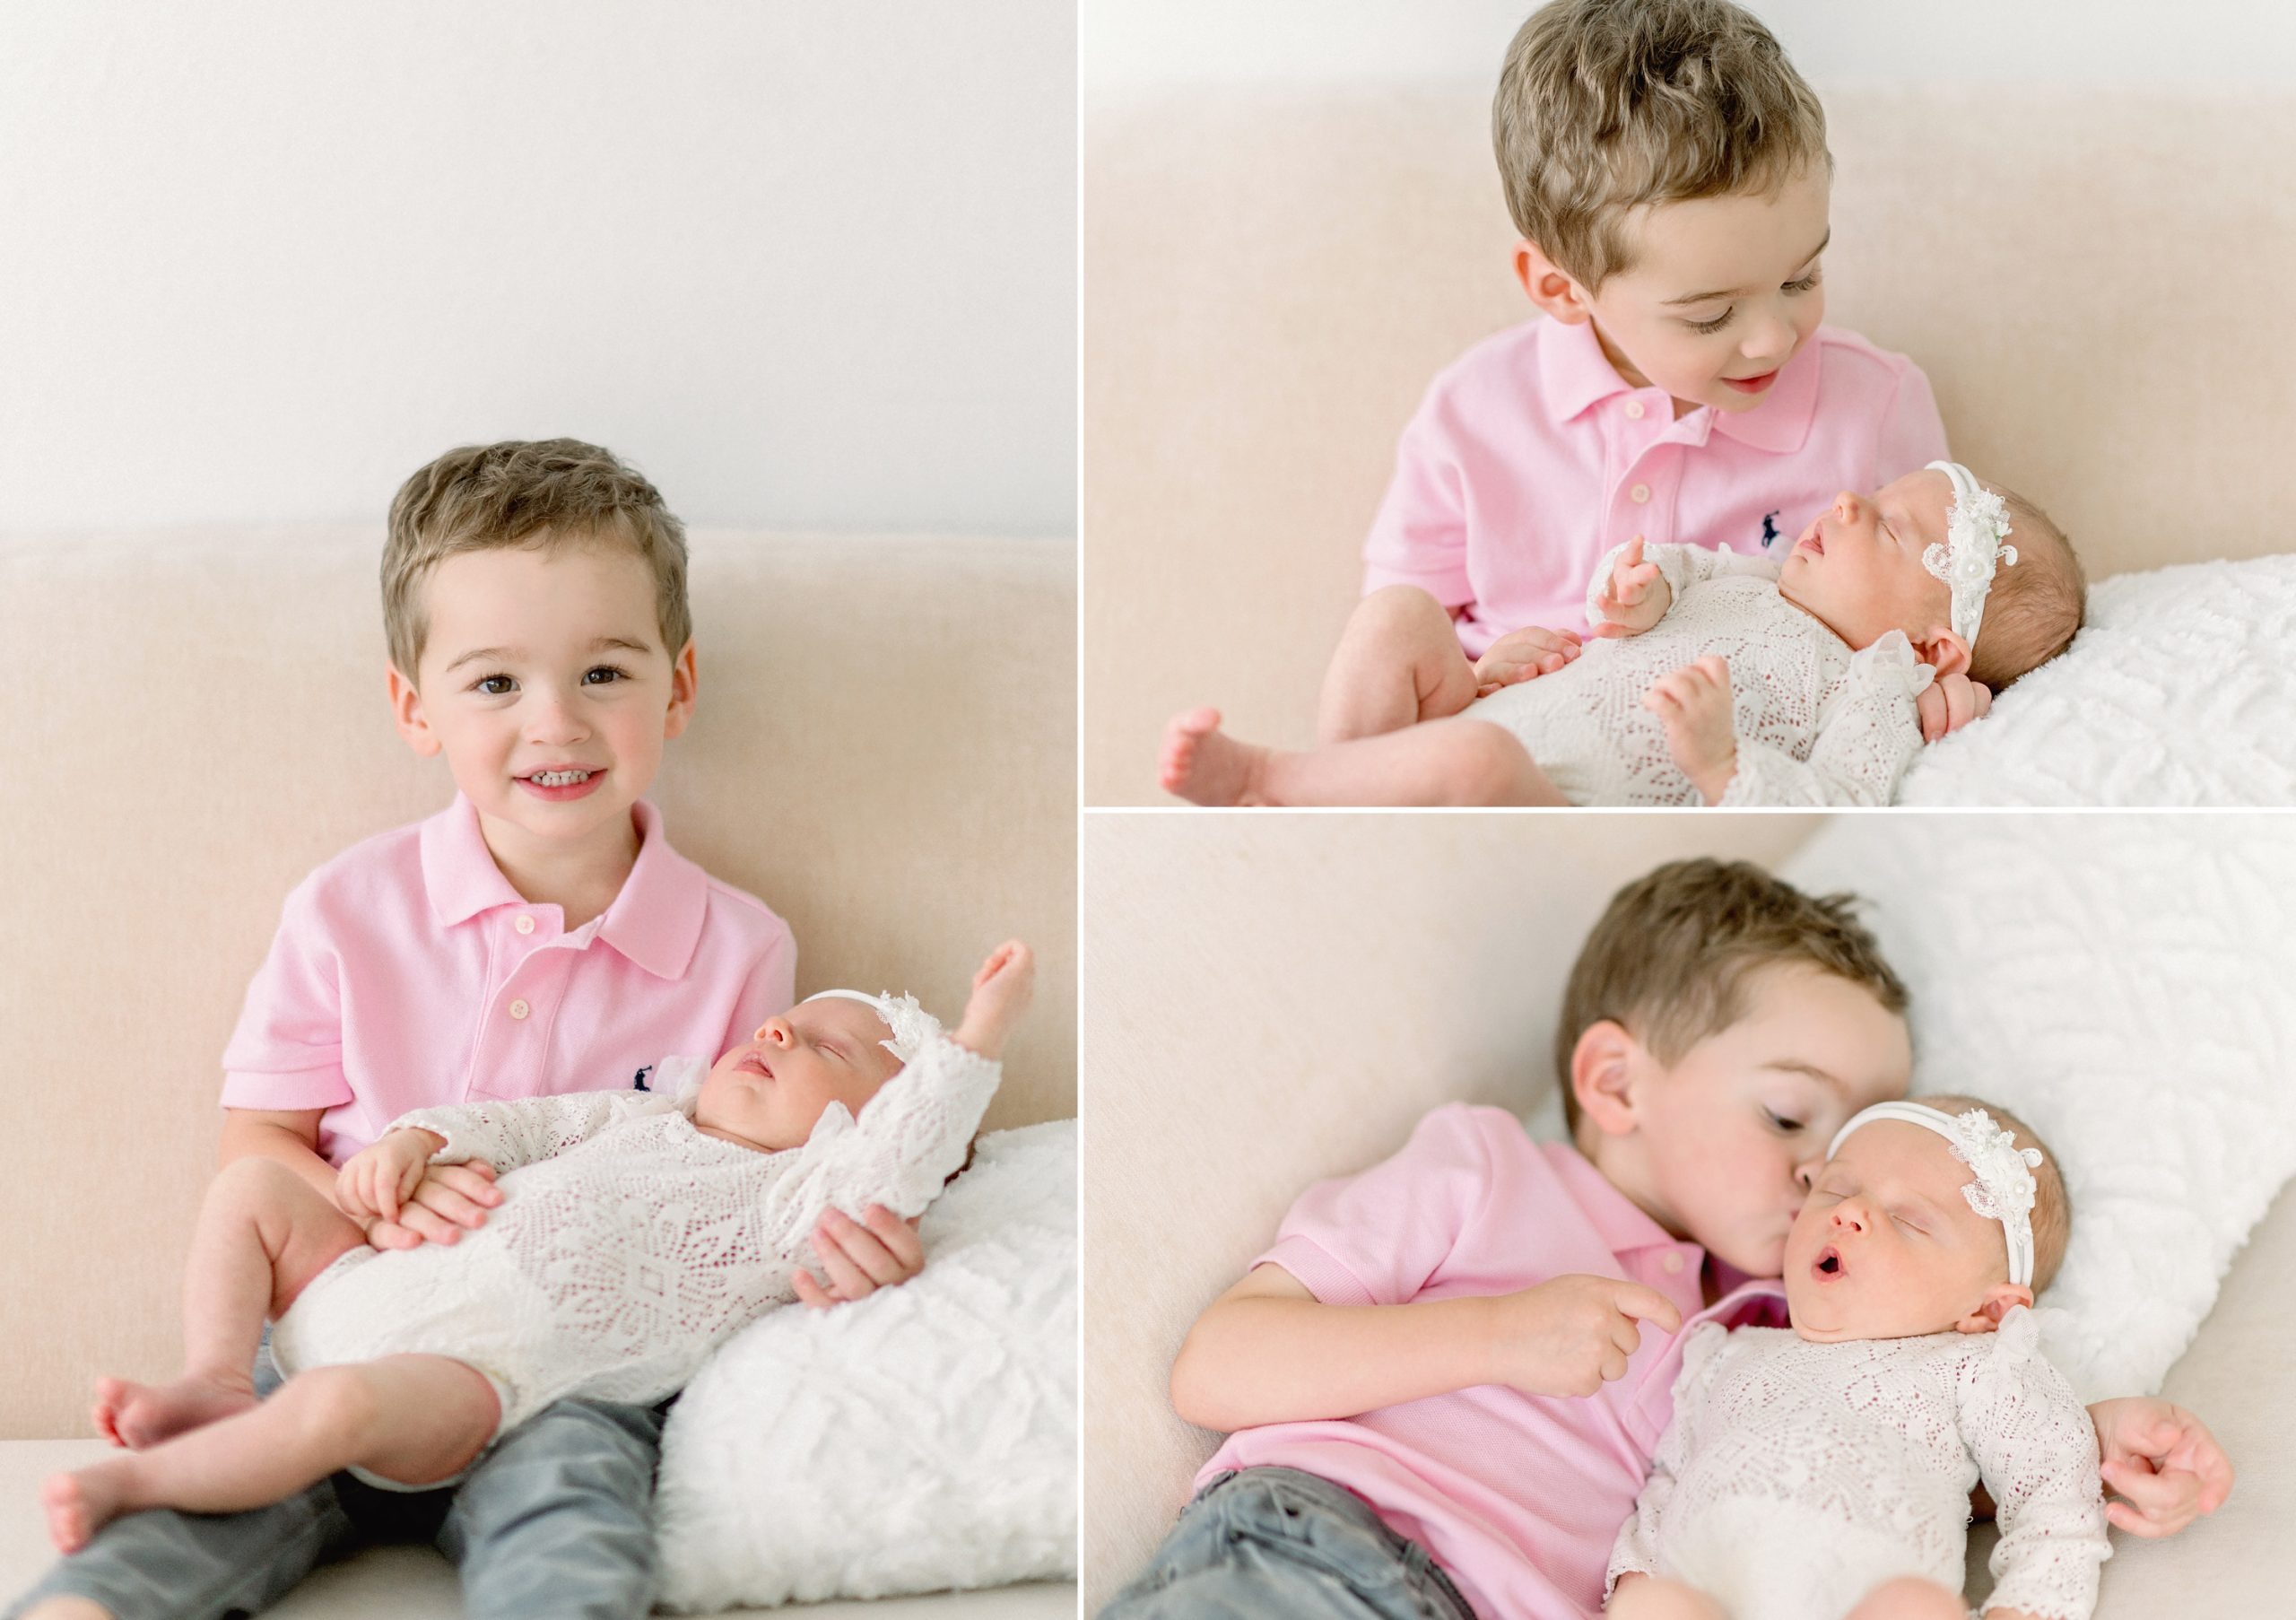 A family of 4 welcomes their new daughter by doing newborn portraits in a bright white studio in Centennial Colorado.